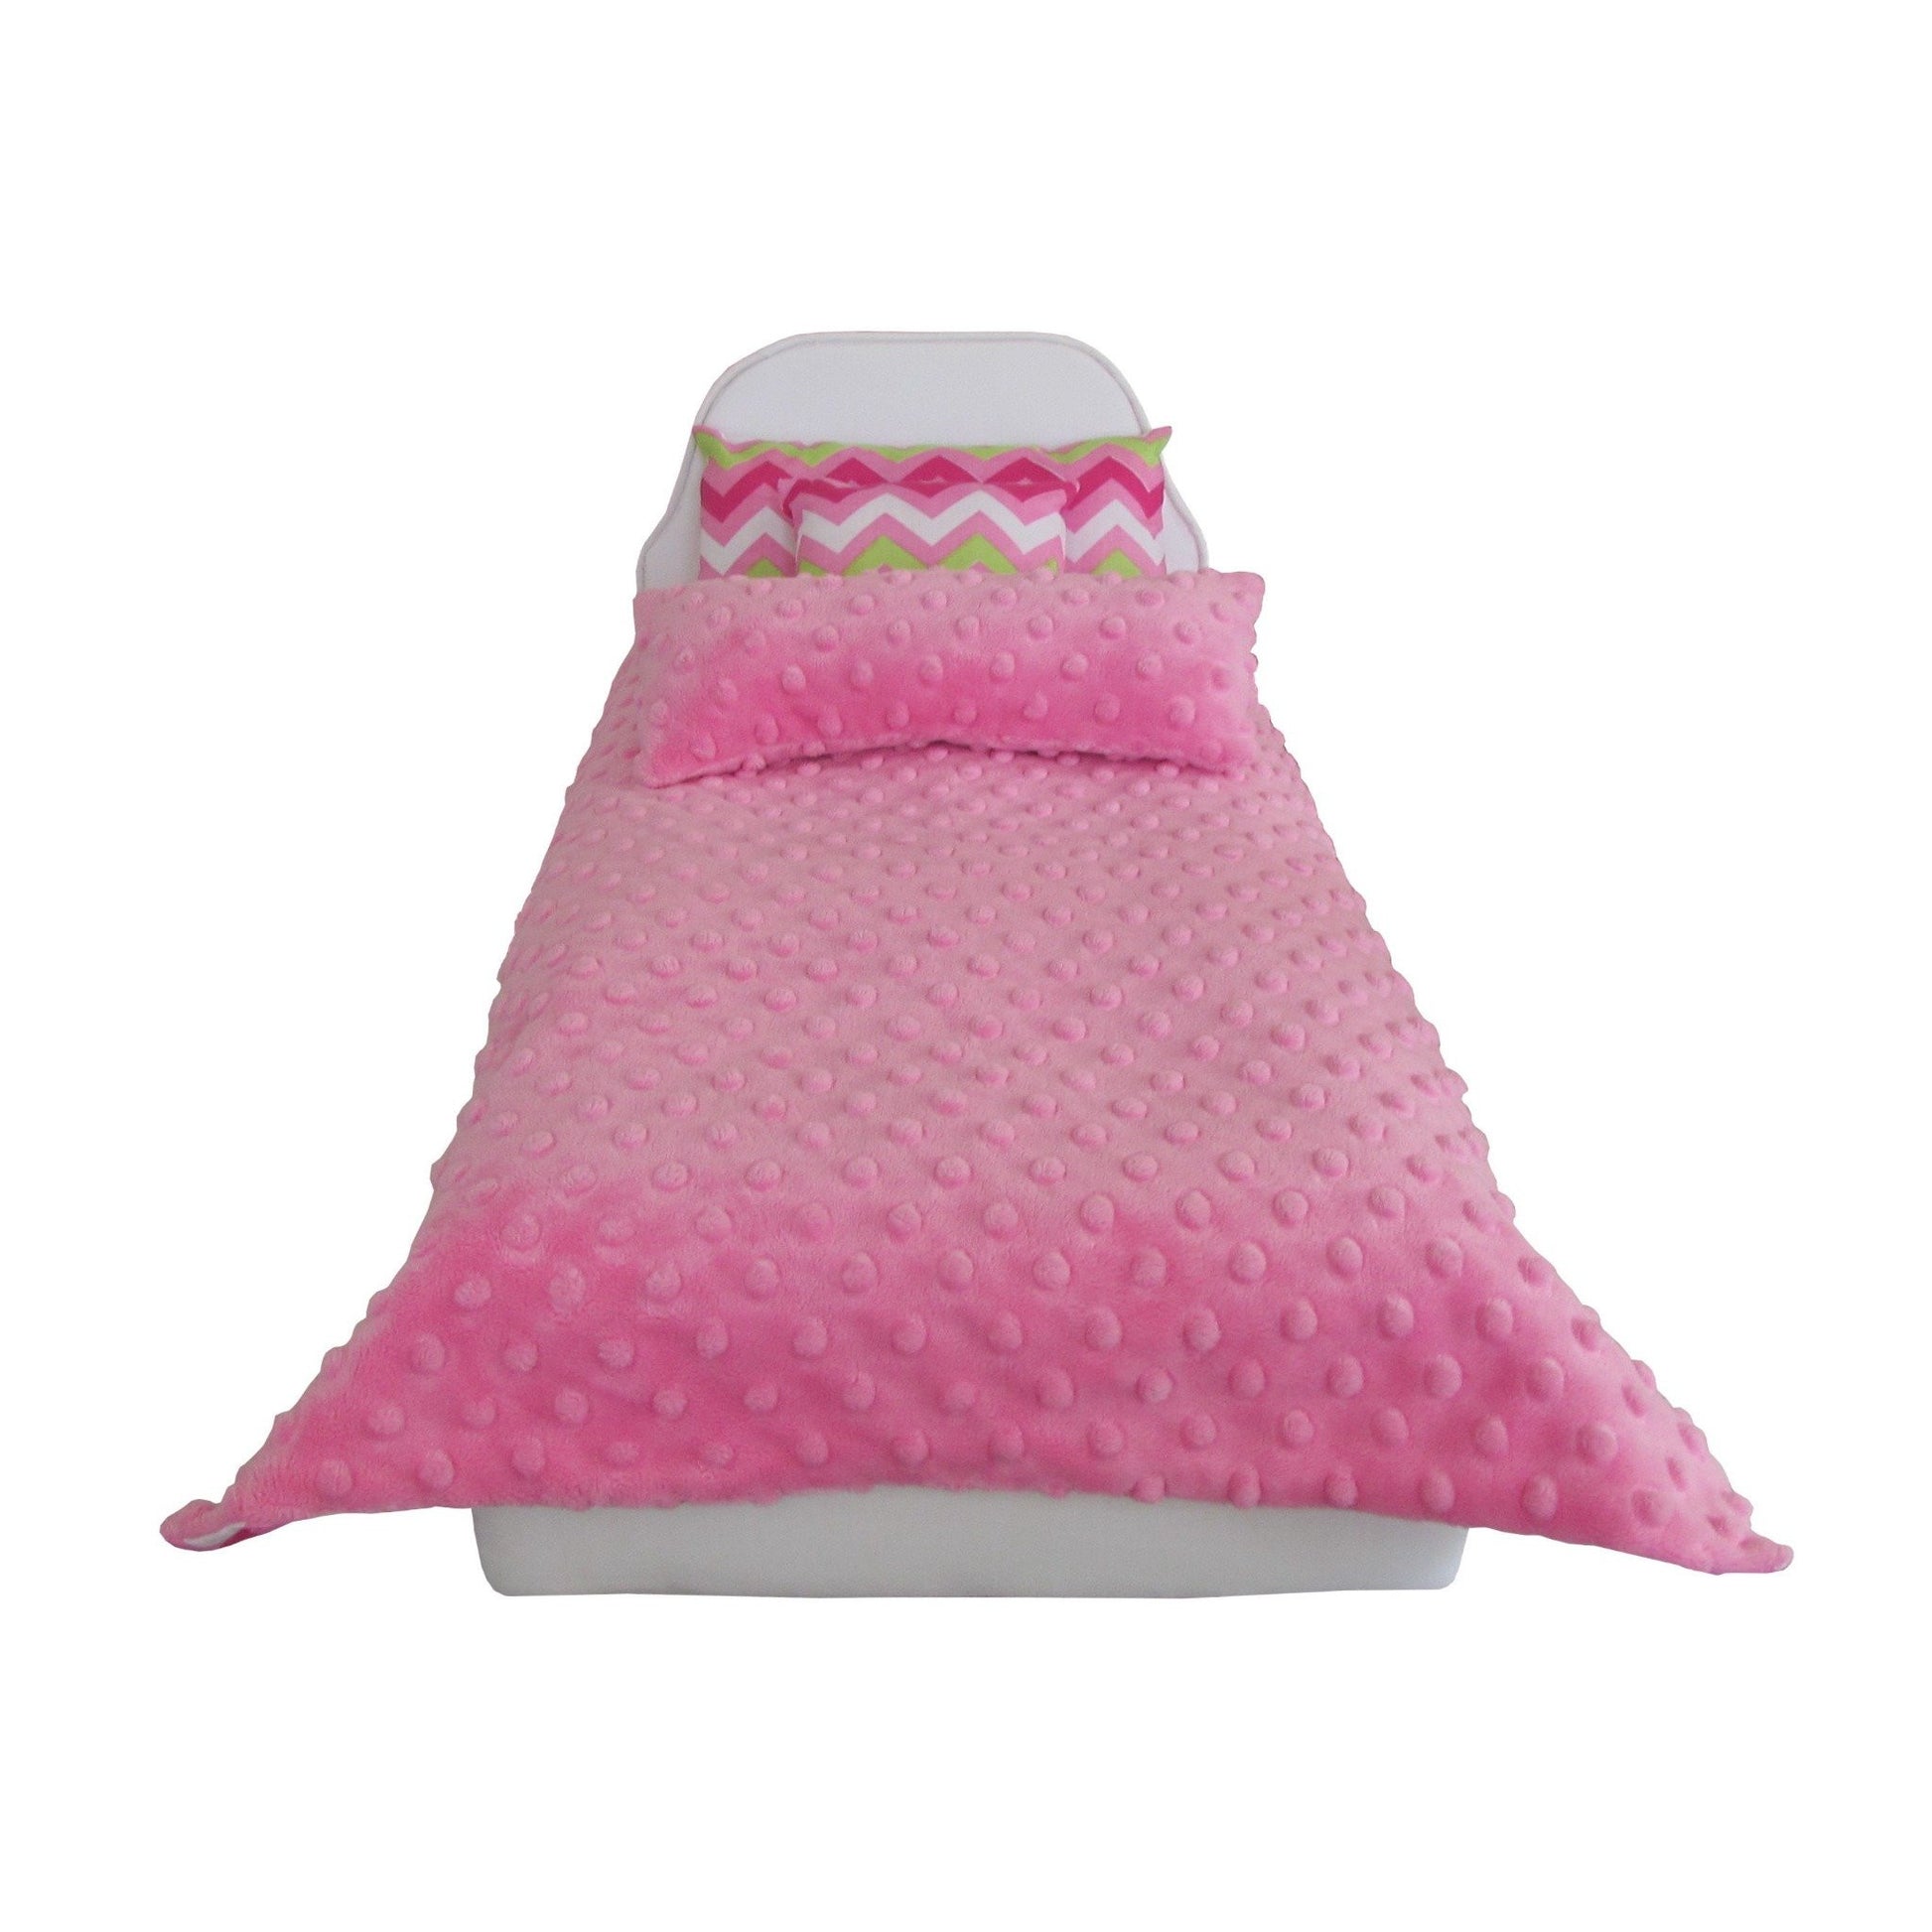 Pink Multi-color Chevron Pillow and Minky Comforter for 18-inch dolls Second view